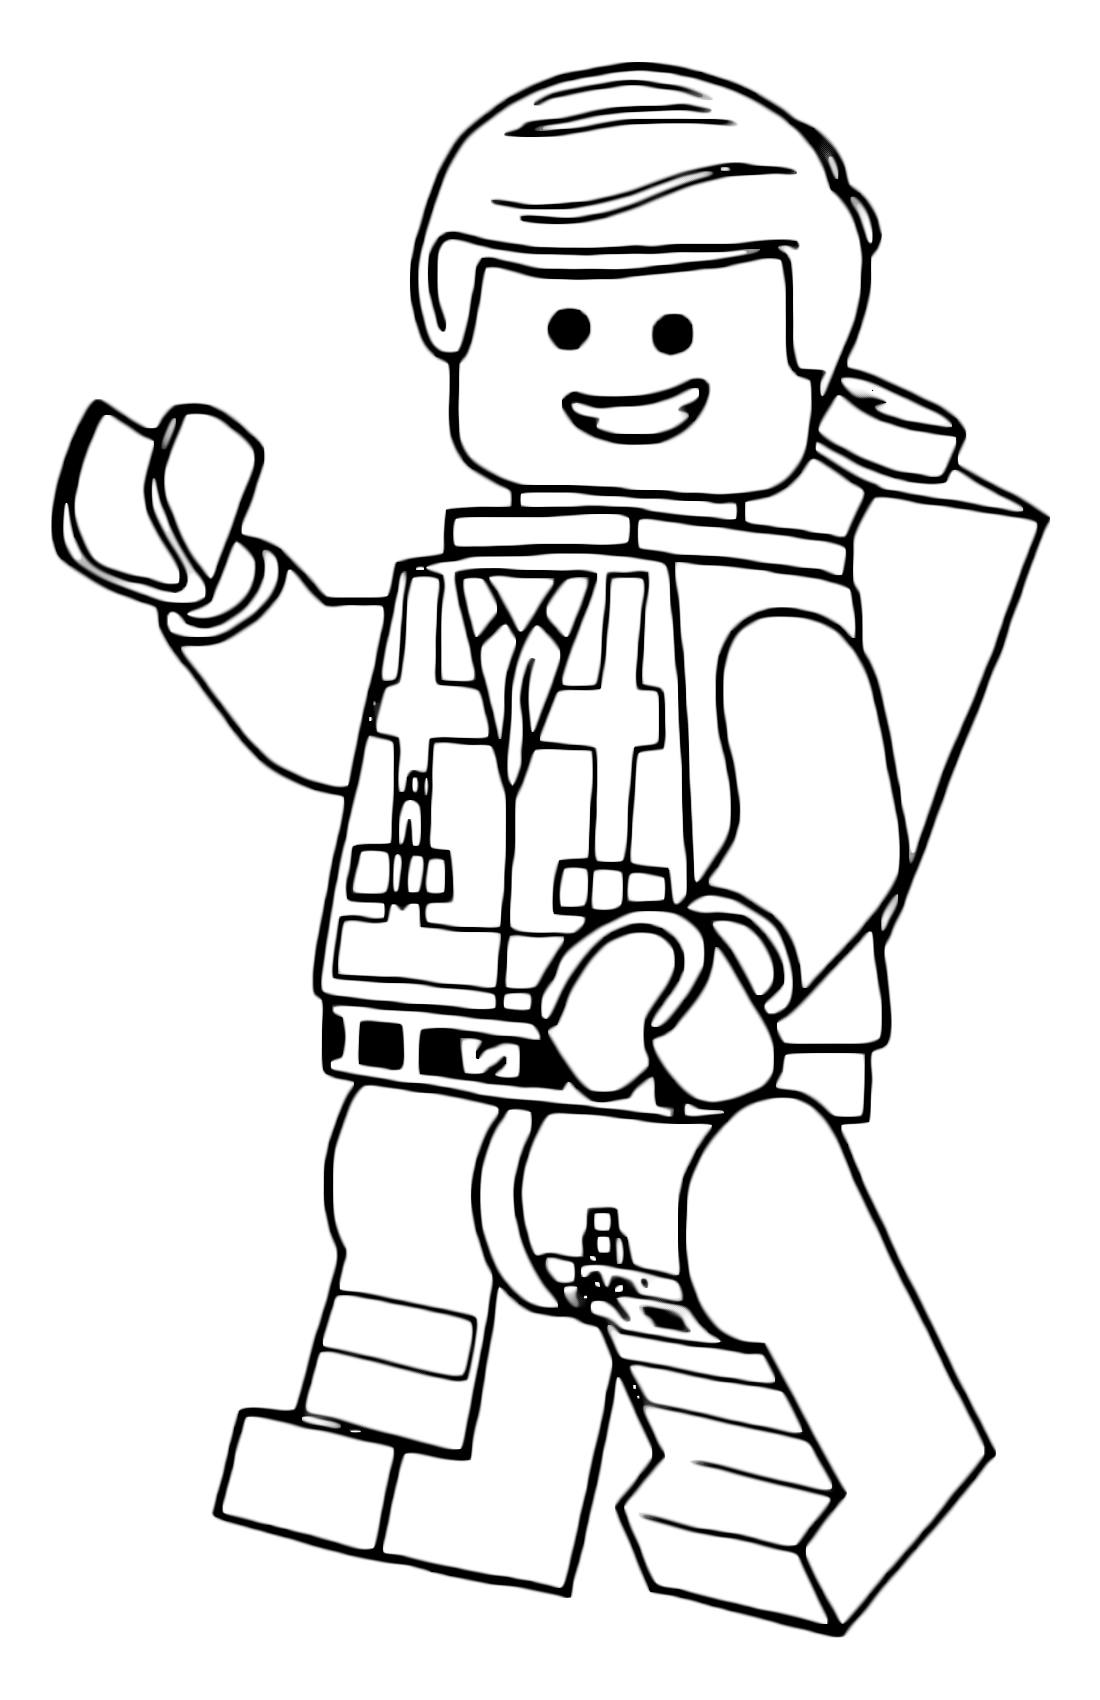 lego-free-printable-coloring-pages-printable-world-holiday